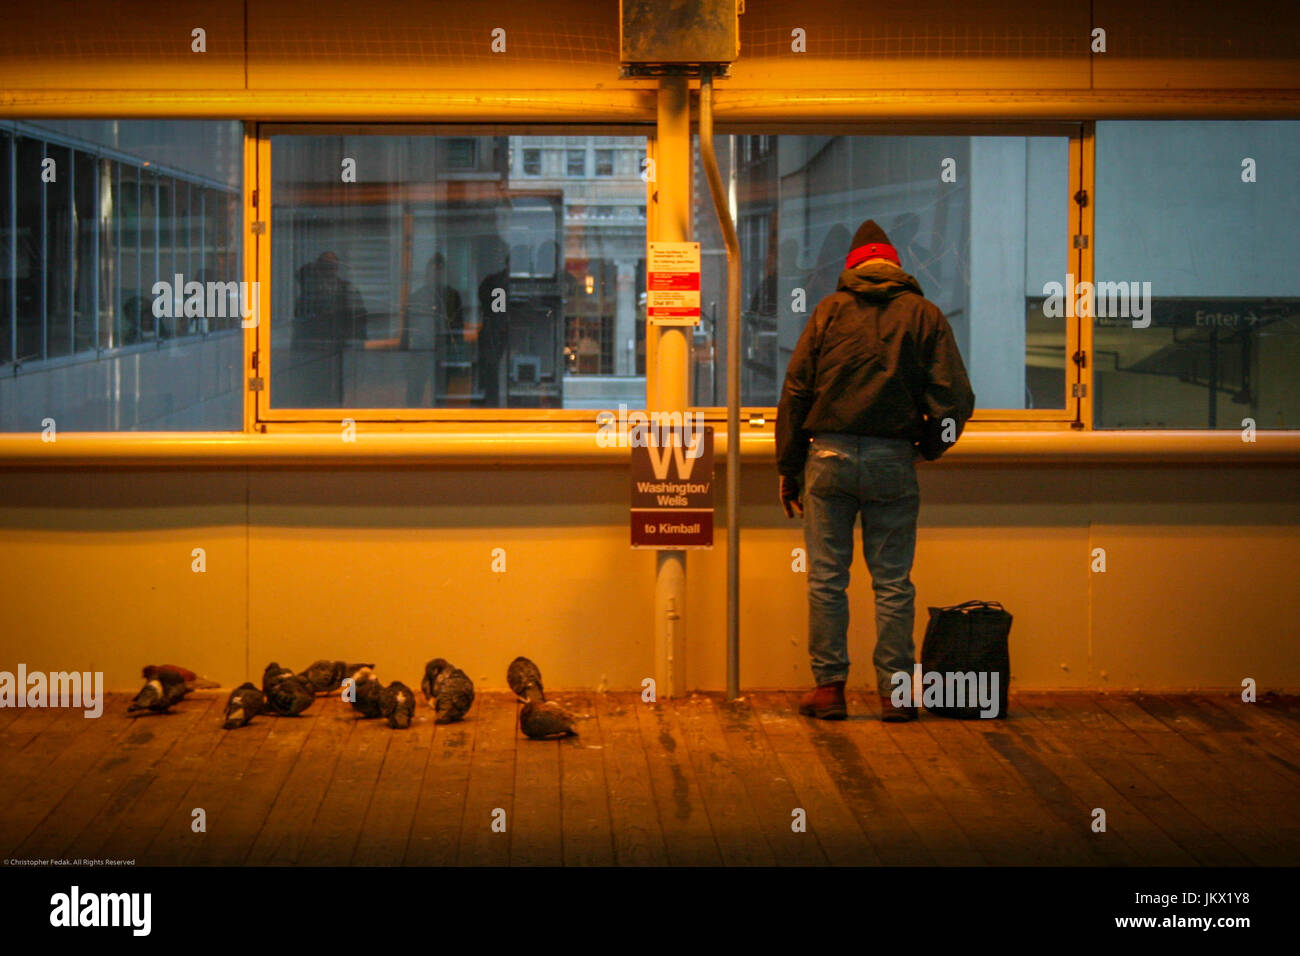 waiting for the subway, staying warm, looking out. Stock Photo